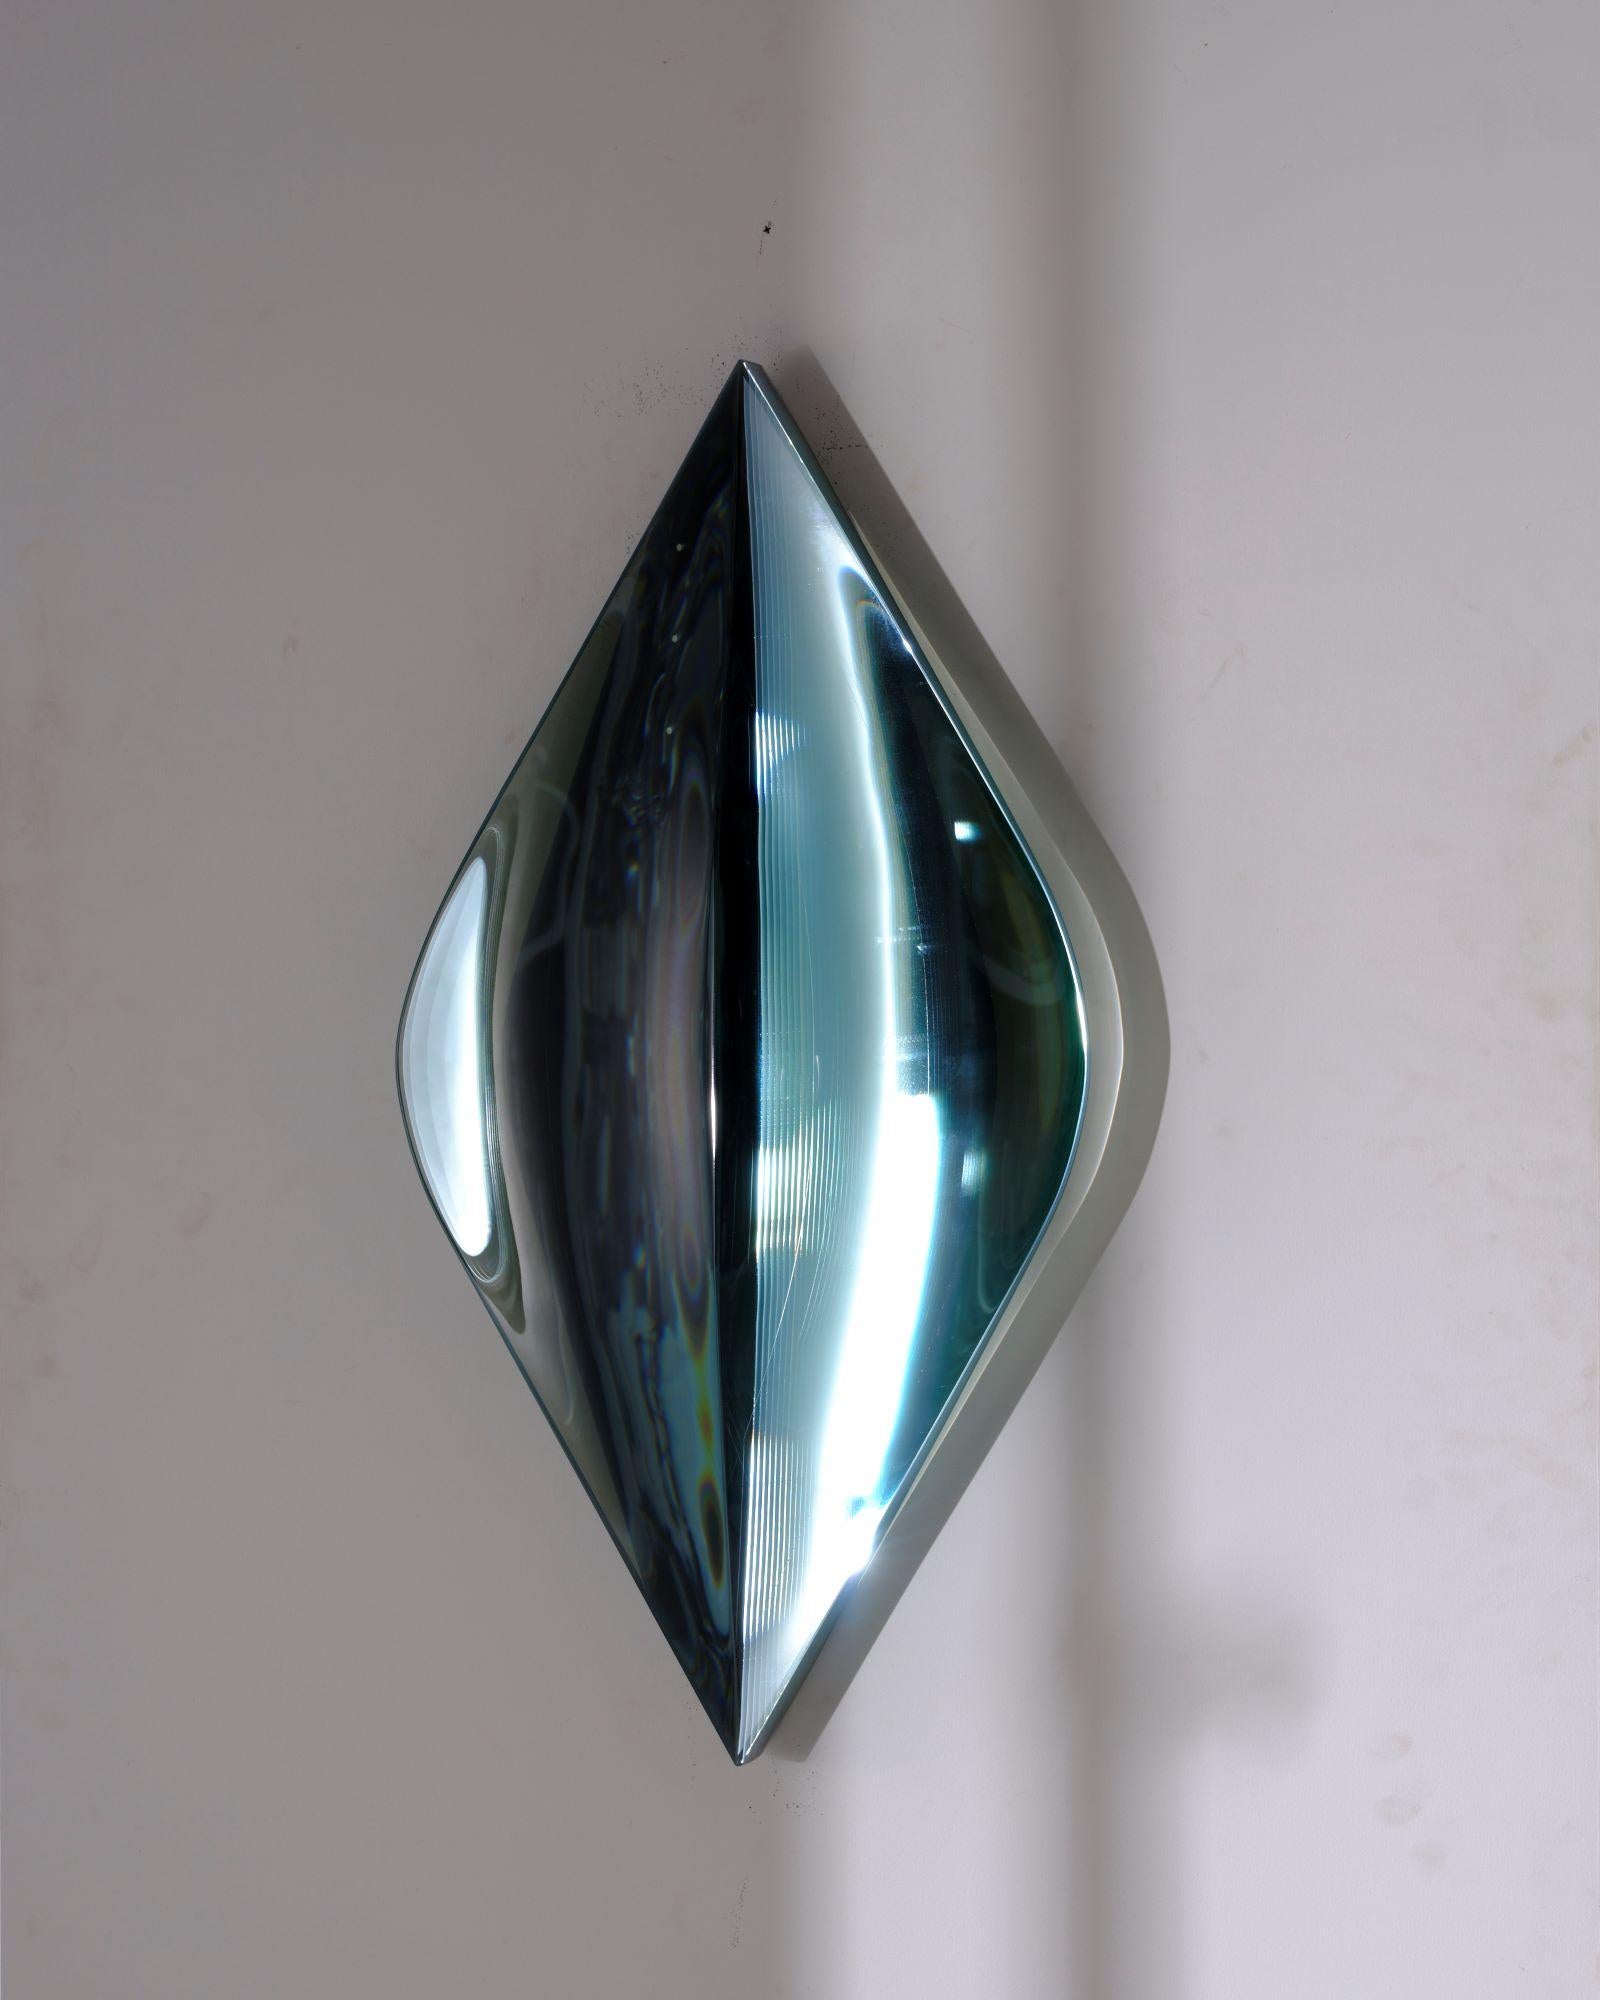 P.010502-II by Toshio Iezumi - Contemporary glass sculpture, green, abstract For Sale 1